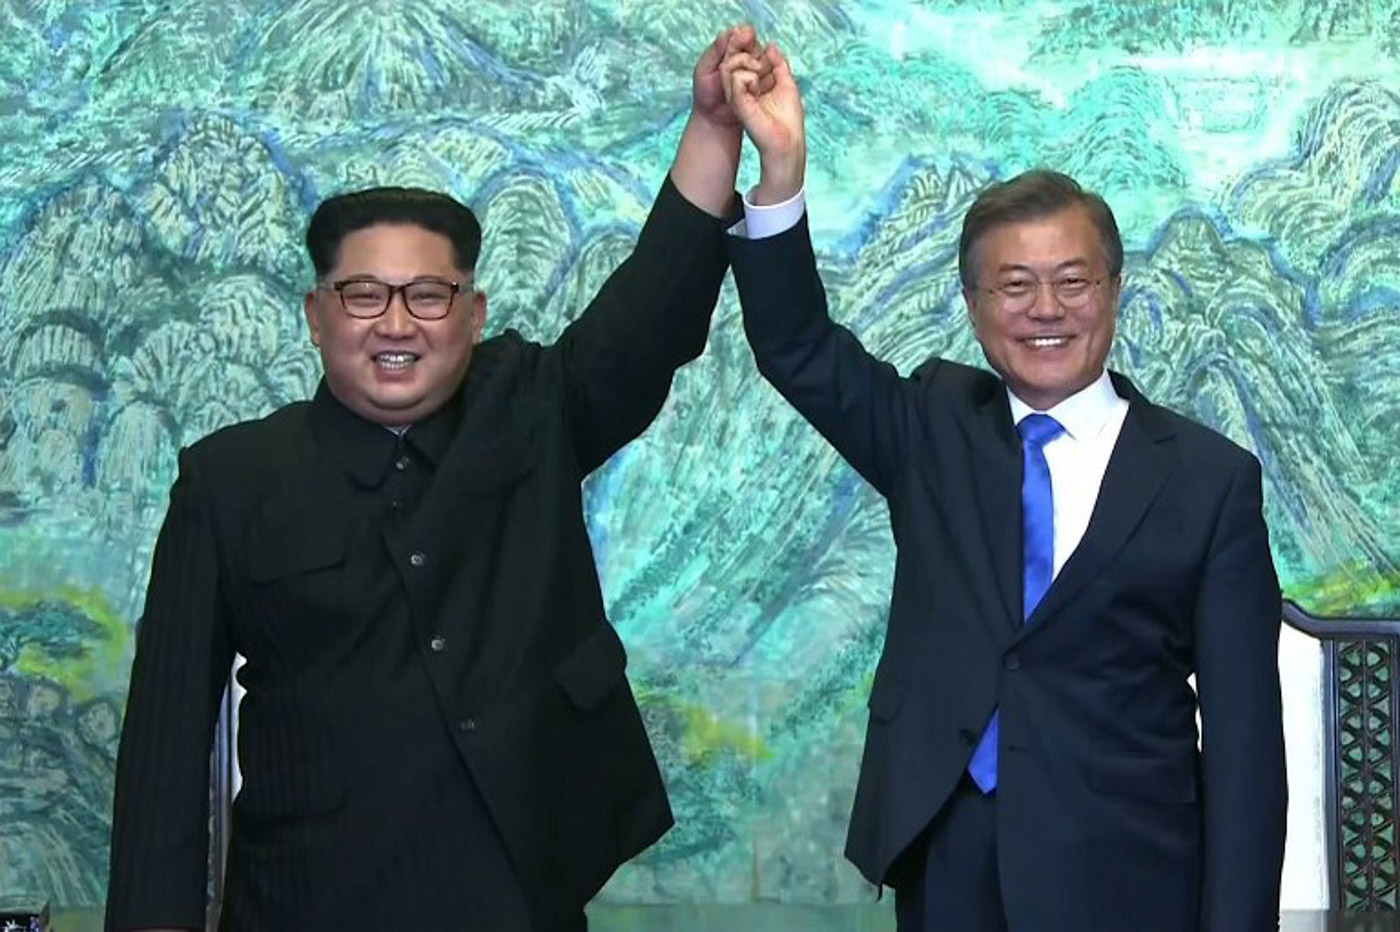 PANMUNJEOM DECLARATION. This screen grab from the Korean Broadcasting System (KBS) taken on April 27, 2018 shows North Korea's leader Kim Jong Un (L) and South Korea's President Moon Jae-in (R) joining hands near the end of their historic summit at Panmunjom. AFP PHOTO / KOREAN BROADCASTING SYSTEM 